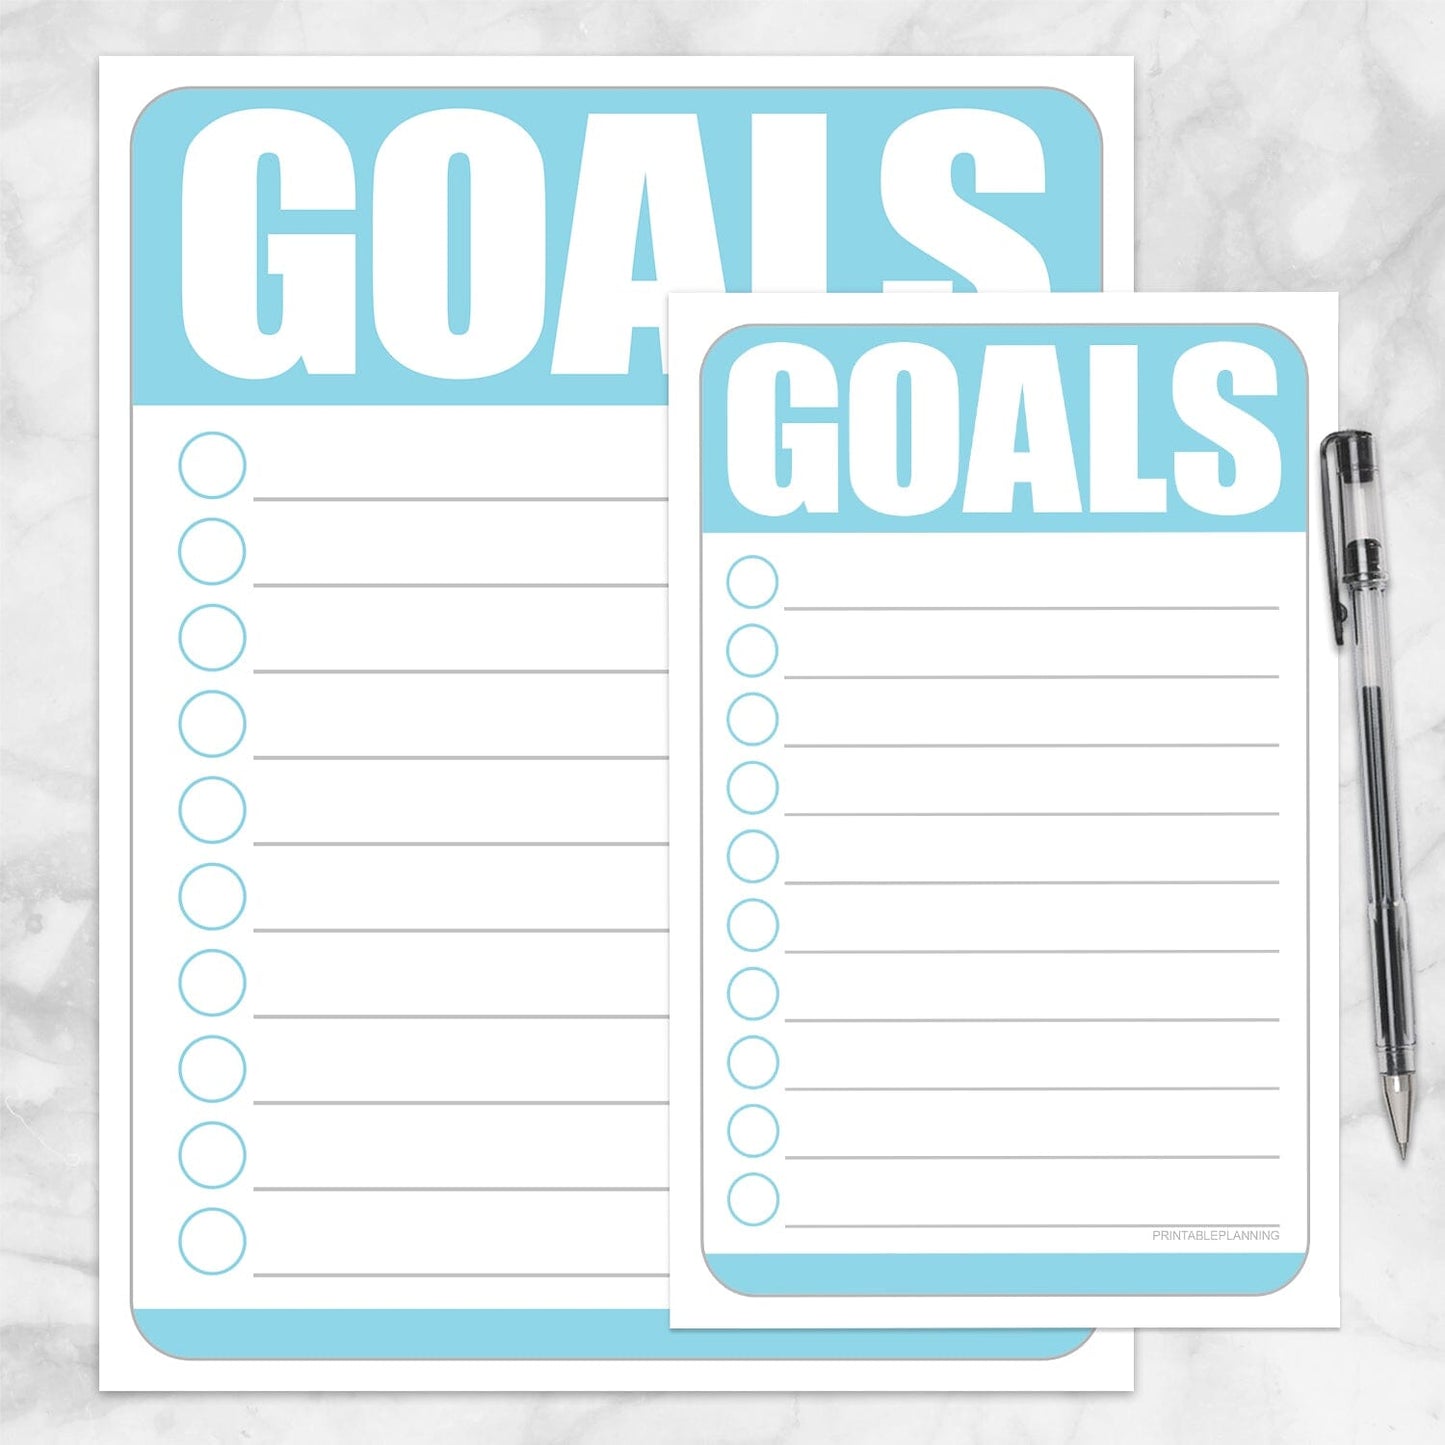 Printable Goals - Blue Full Page and Half Page Checklists at Printable Planning.